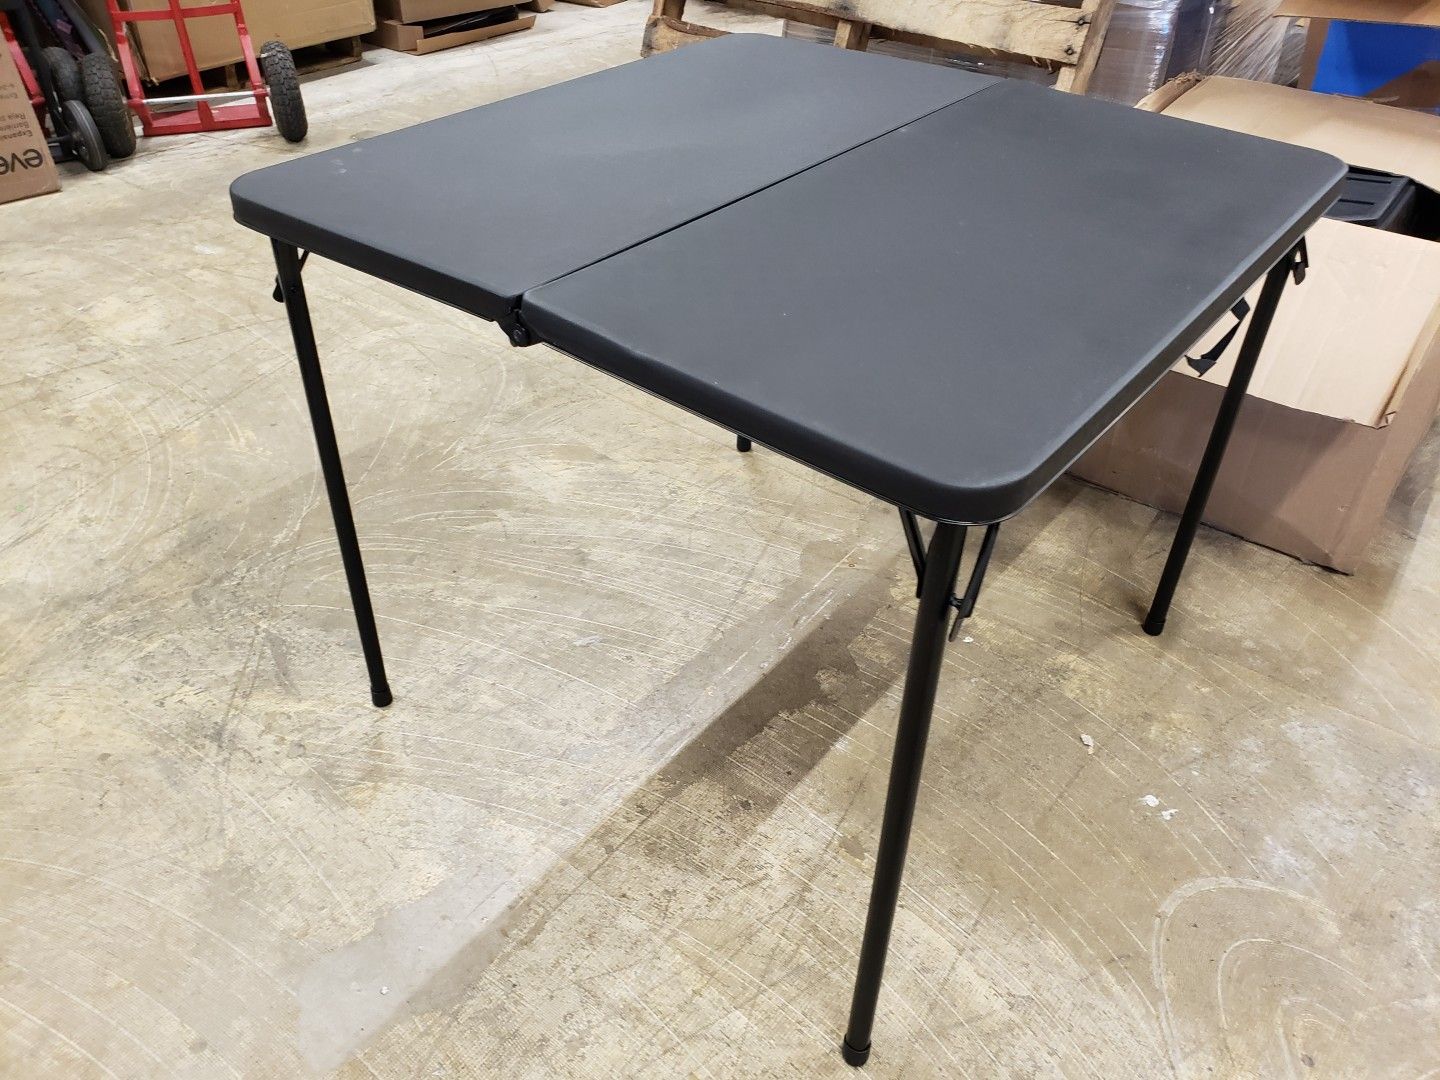 34" Resin Plastic Top Fold-in-Half Table. $28 FIRM each, 3 available